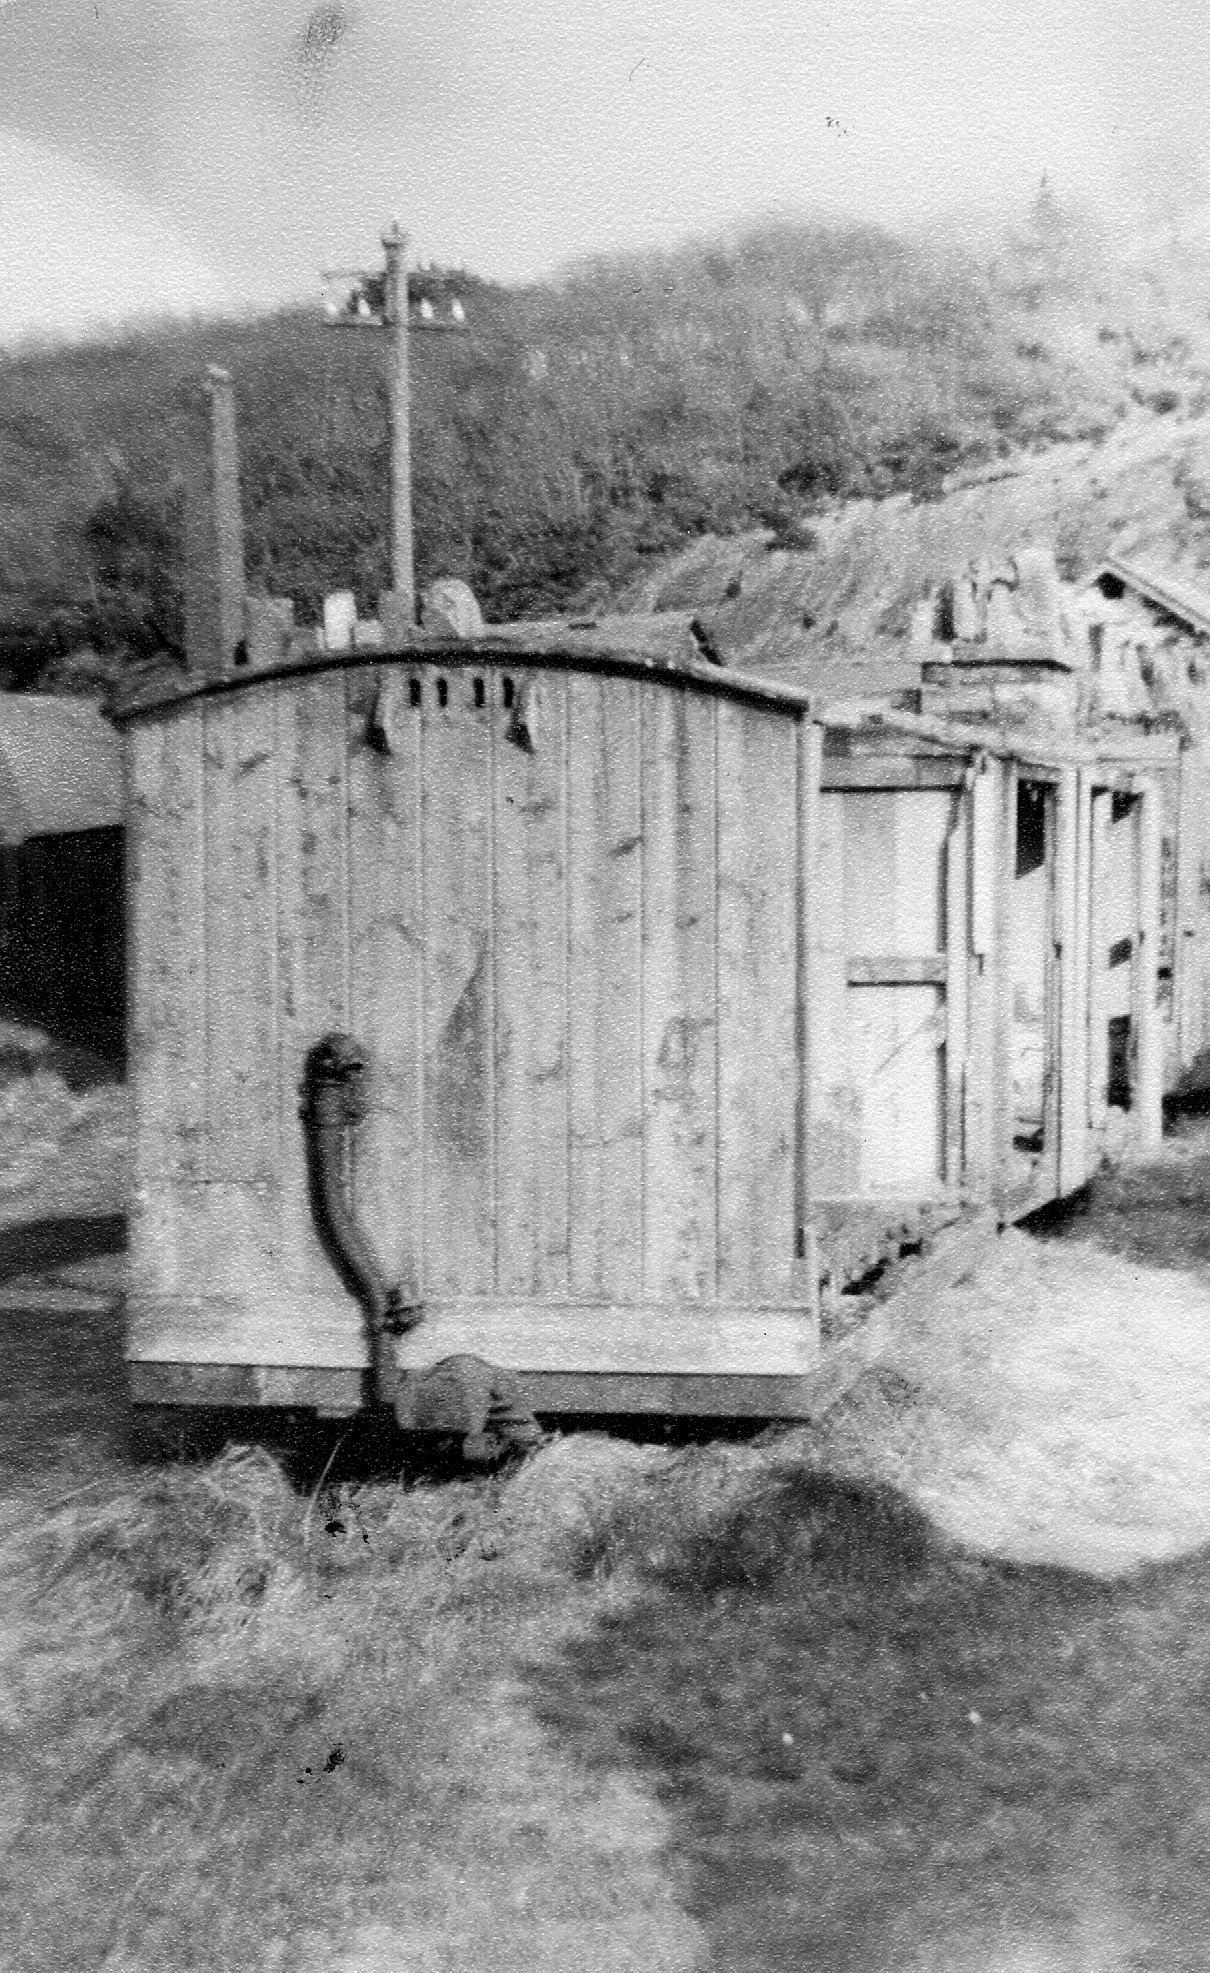 NGRS Collection 3 - Ffestiniog Rly -  Apr 1954 - Derelict coaches at Boston Lodge - unknown source.jpg